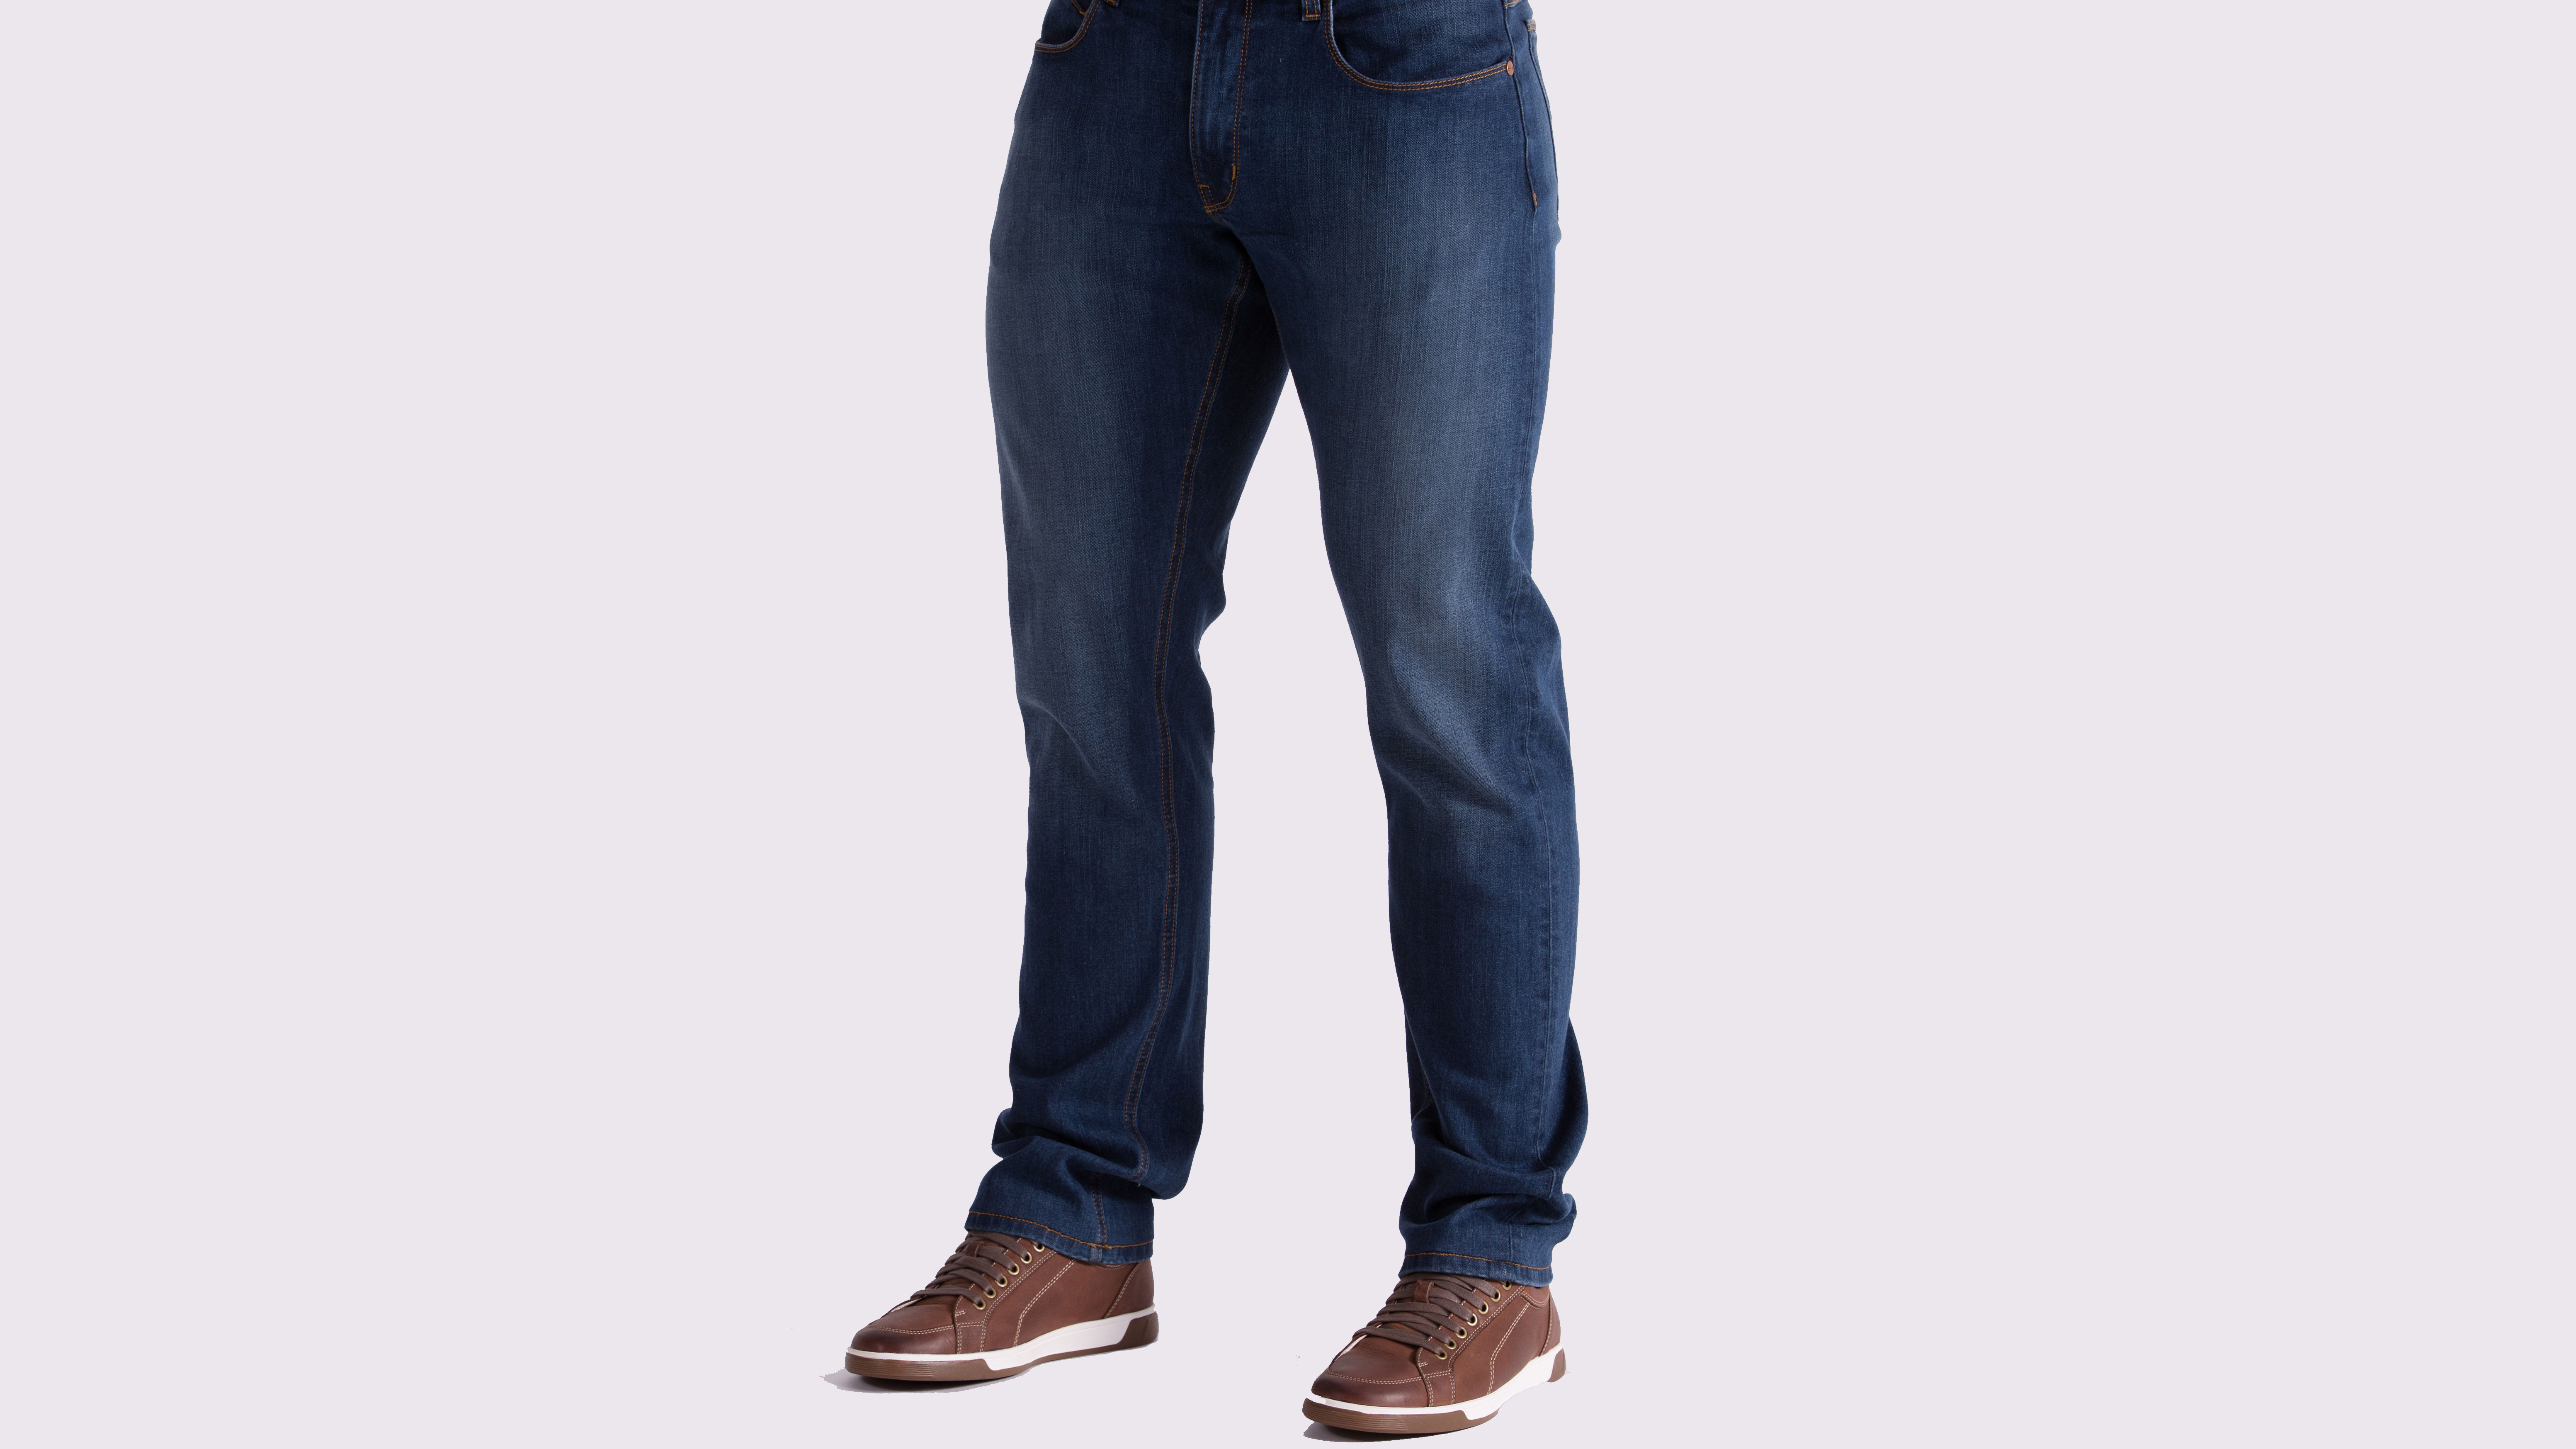 best jeans for athletic men's thighs